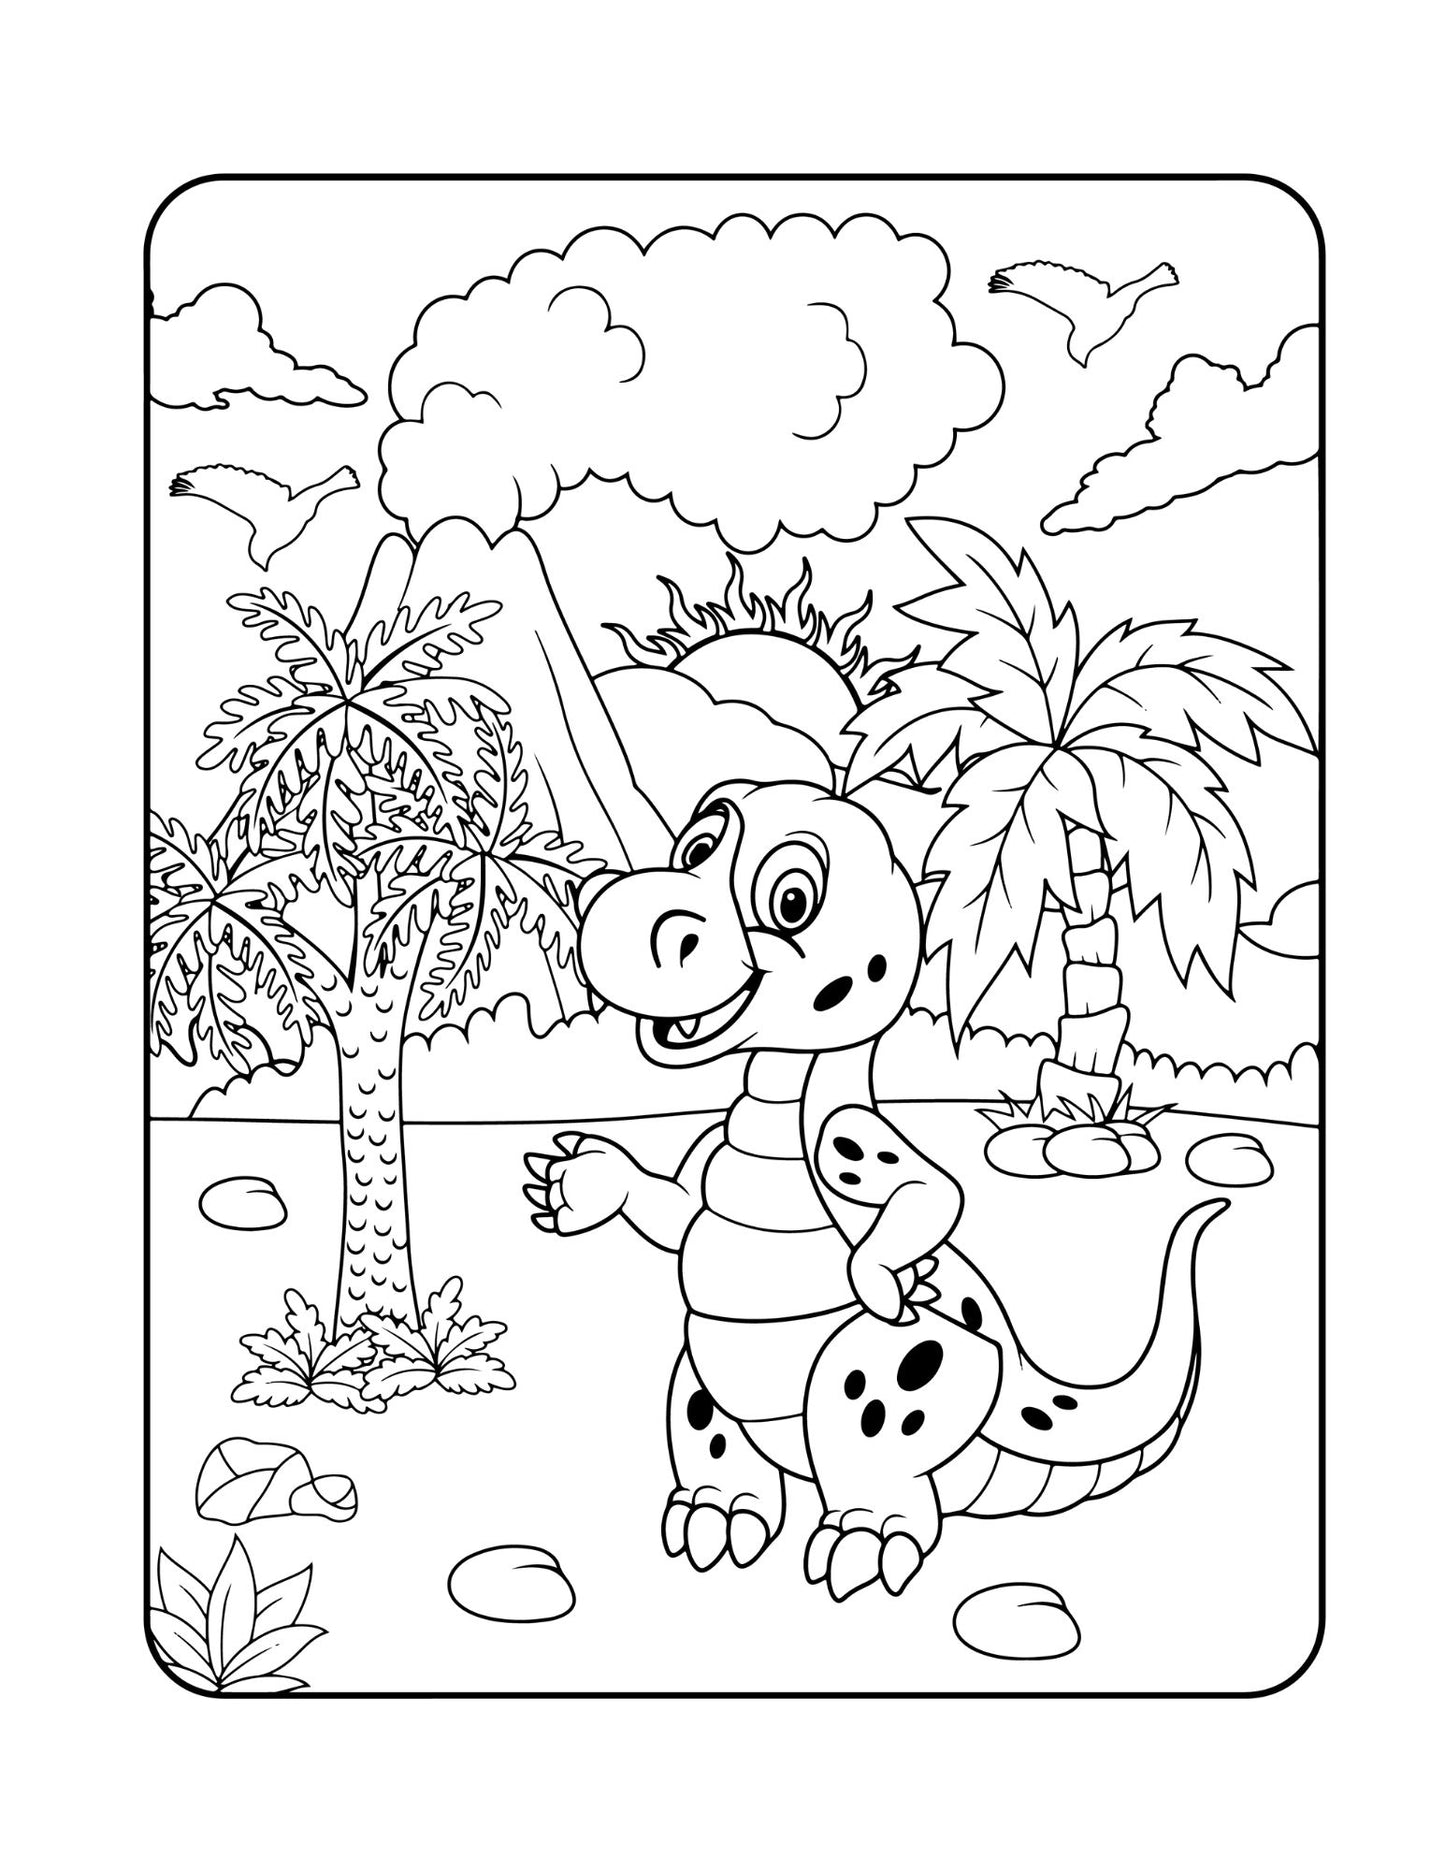 Dino Coloring Book Gift 50 Pages Dinosaur Activity Coloring Book Cute Baby Dinosaur Coloring Book Young Kids Adults Dinosaur Coloring Pages